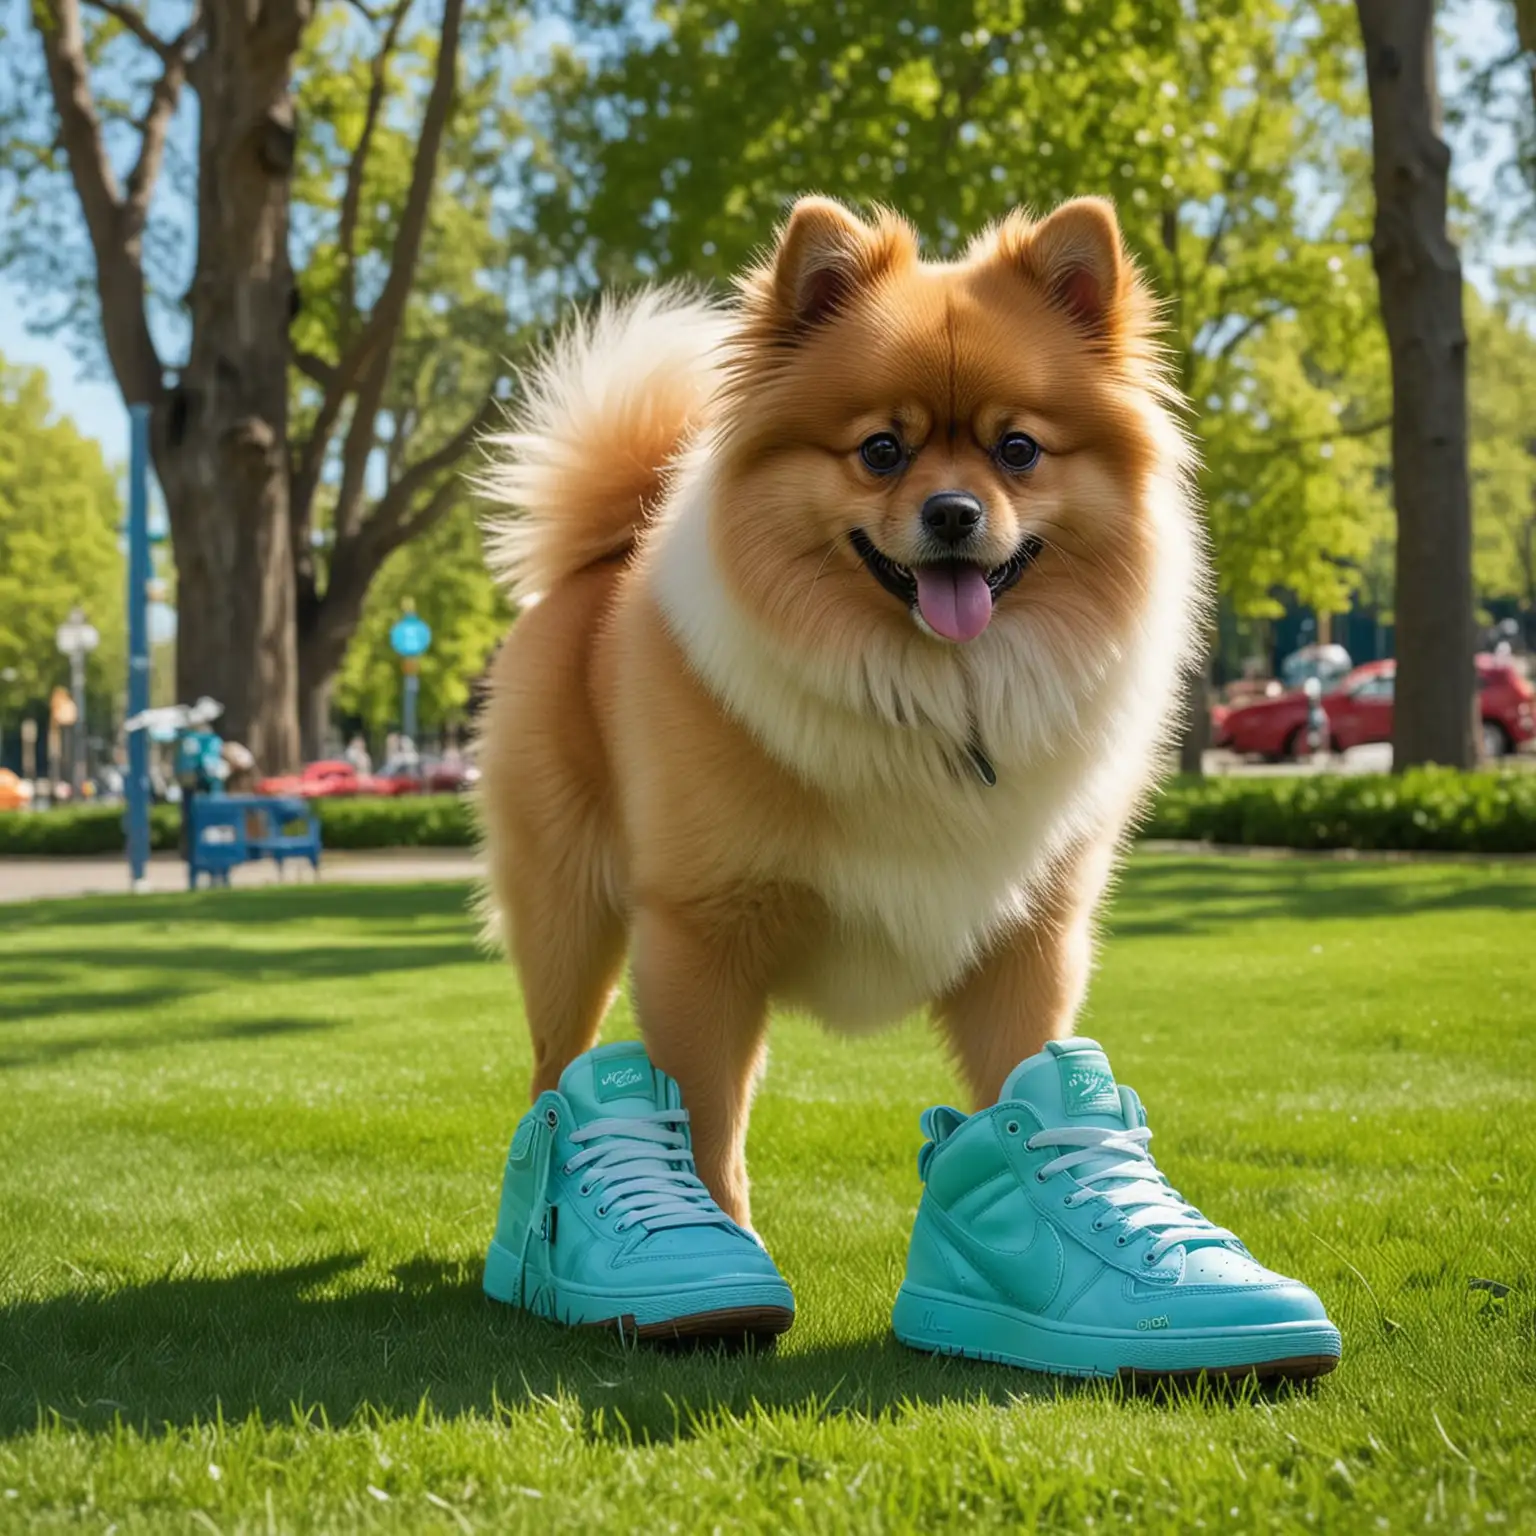 Visualize a small dog, like a Pomeranian, standing next to a pair of giant sneakers. The scene takes place on a sunny day in an urban park with green grass and a few trees in the background. The sneakers are oversized, about four times the size of the dog, and are vividly colored in neon green and blue. The tiny dog looks curiously at one of the sneakers, perhaps puzzled or intrigued by its enormous size compared to its own tiny stature. The image captures the striking contrast in size between the dog and the footwear, highlighting a playful and whimsical theme.